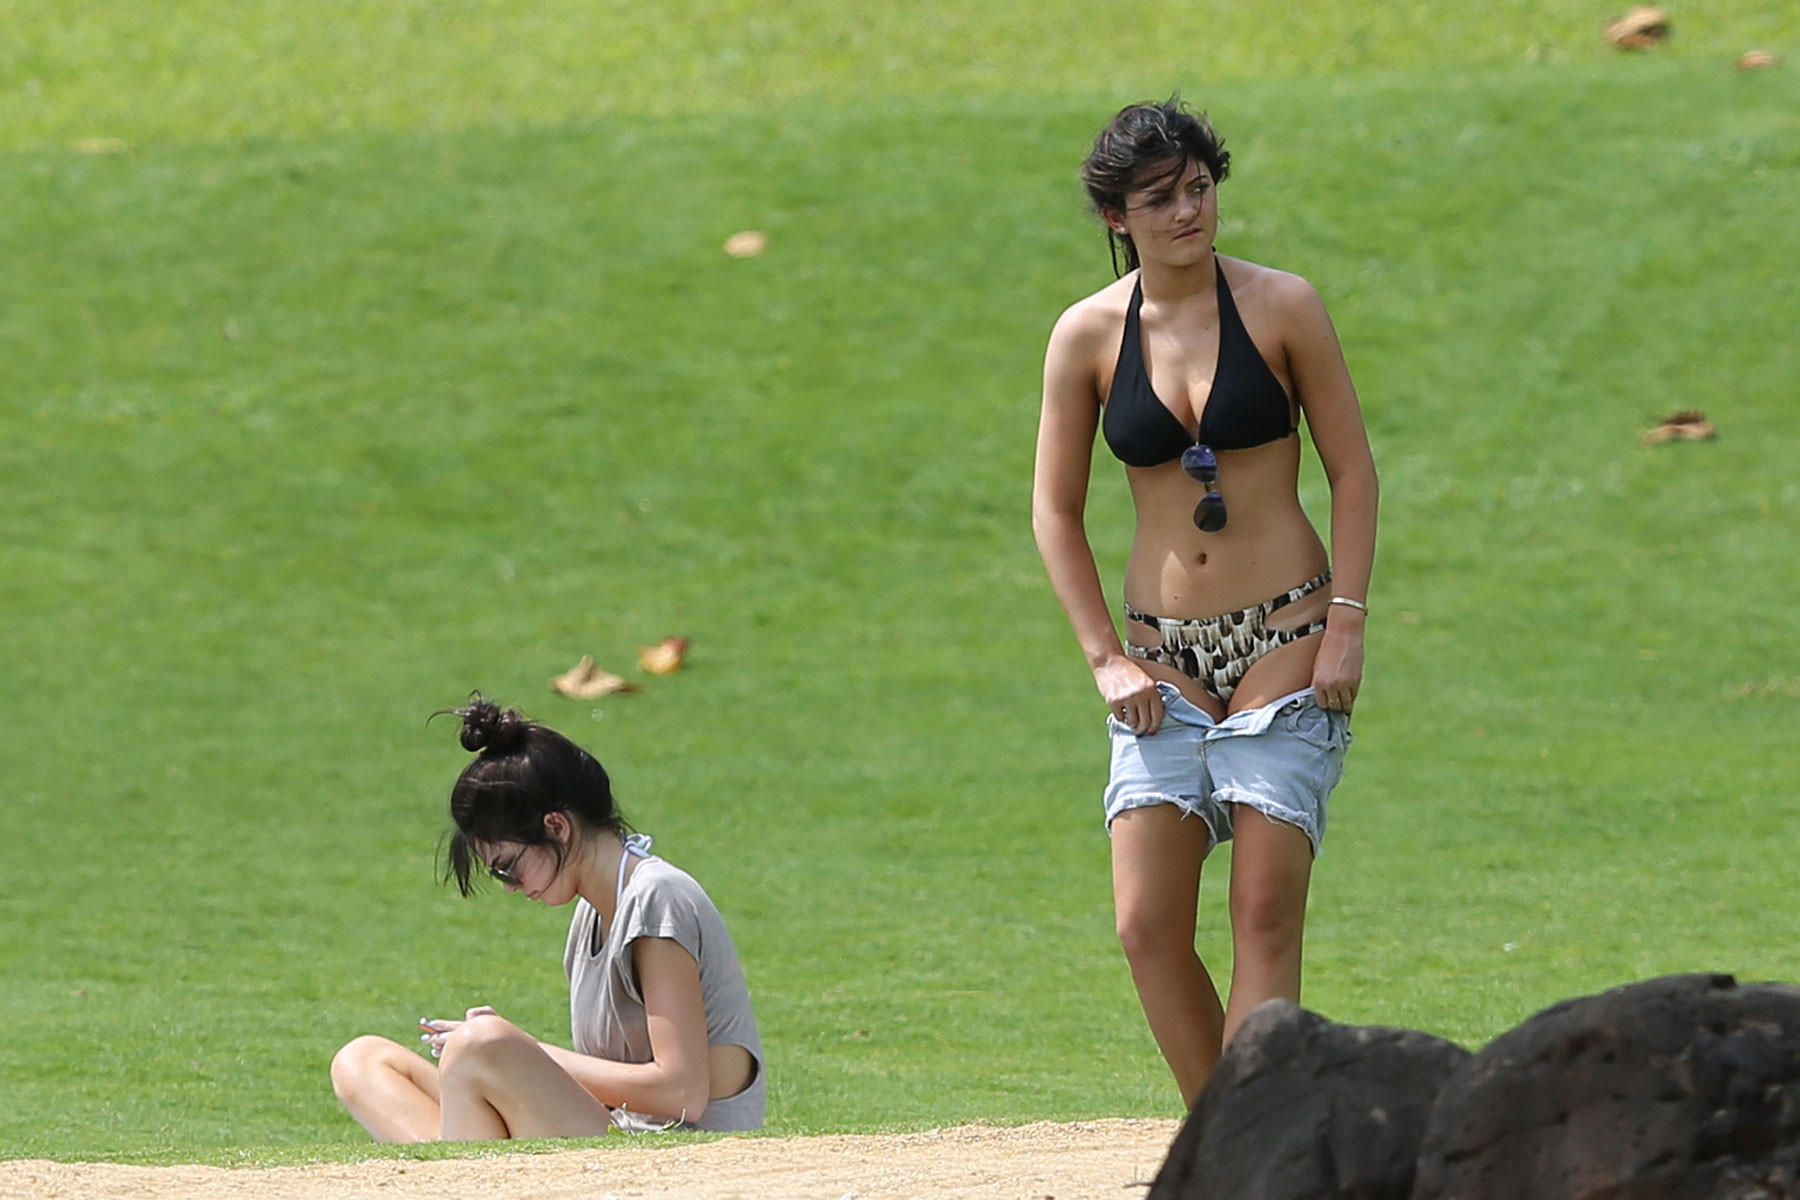 Kylie and Kendall Jenner tanning their hot bodies in skimpy bikini sets on a mea #75174082